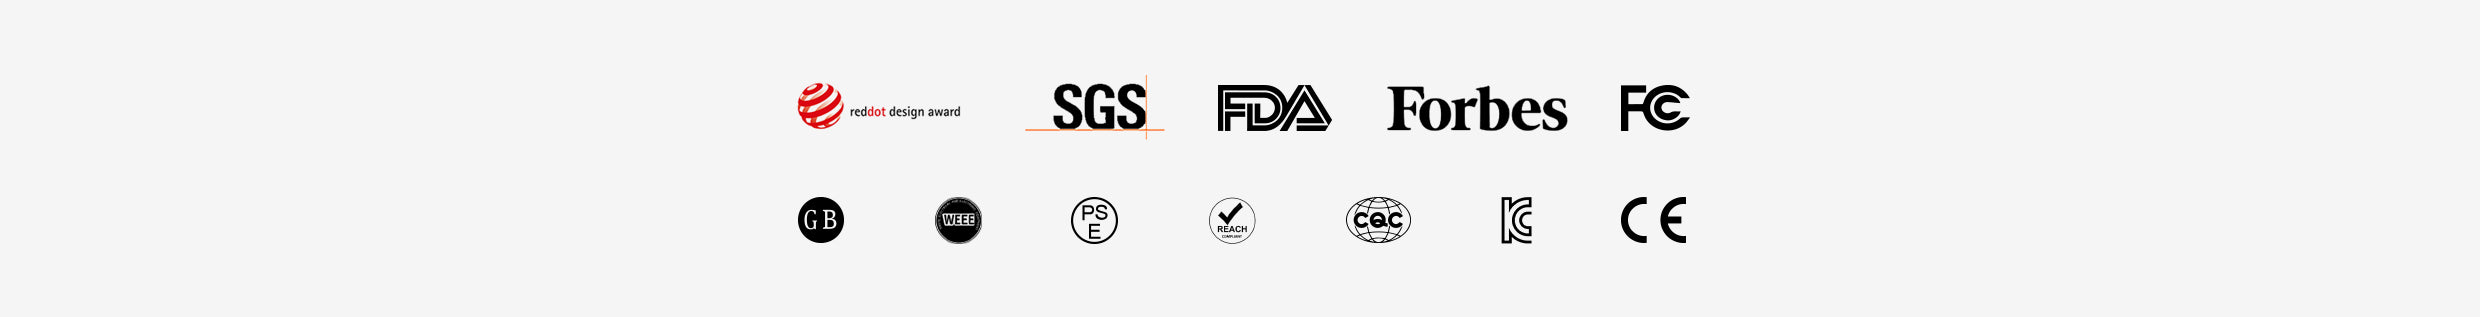 JOVS' commitment to quality and innovation is recognized by numerous accreditations and media mentions, including Red Dot, SGS, FDA, Forbes, and more.